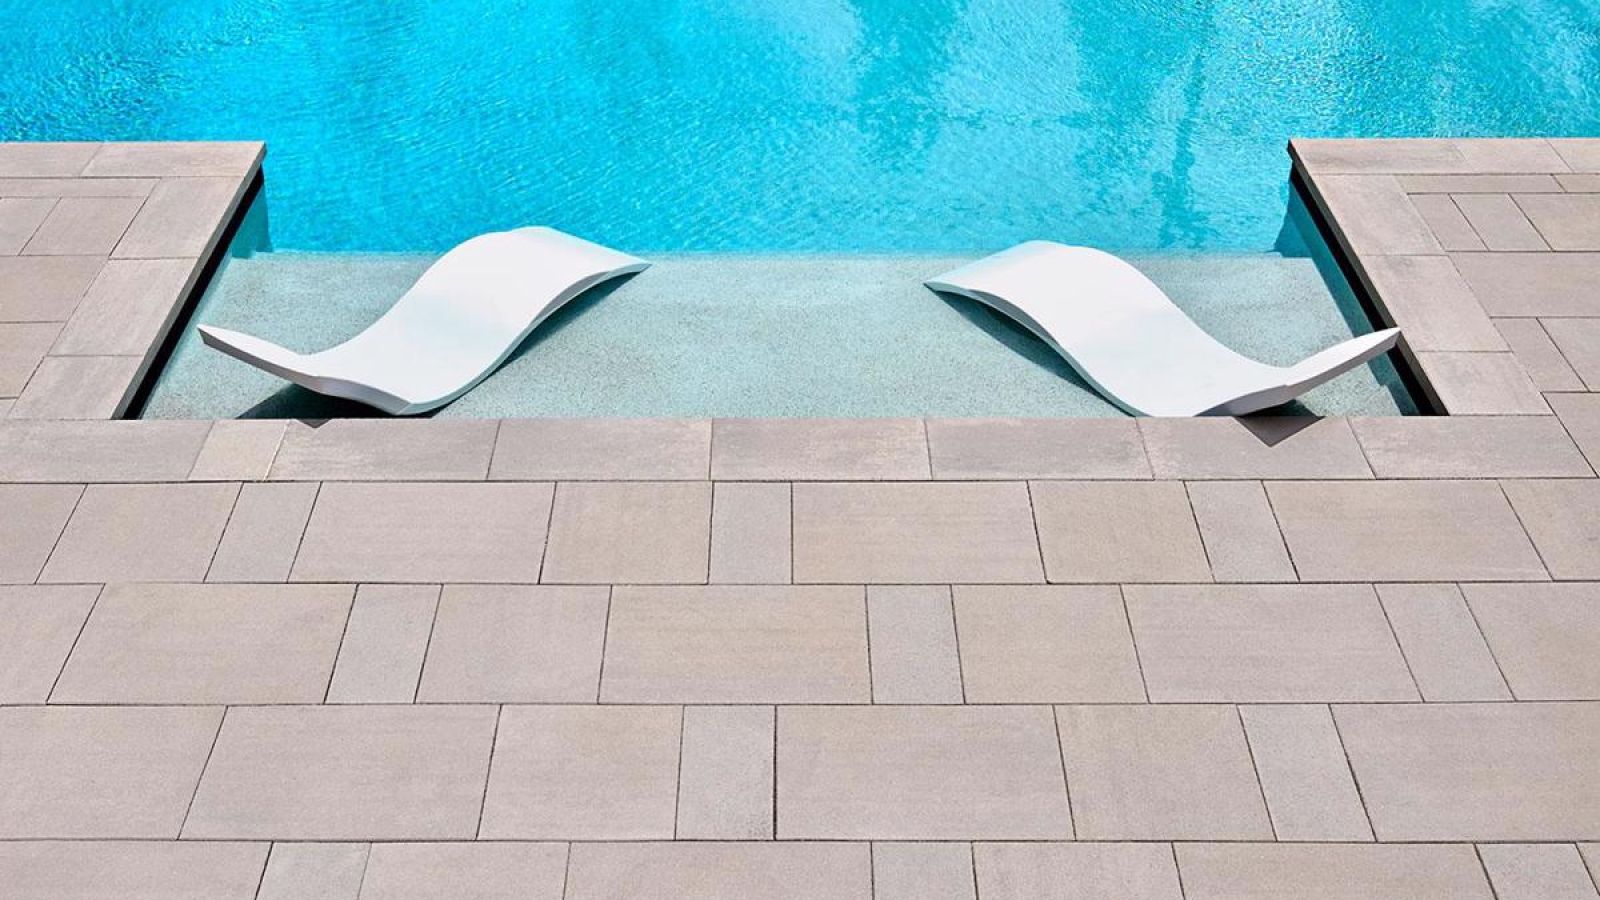 Para modern concrete patio slabs installed in an elegant outdoor setting